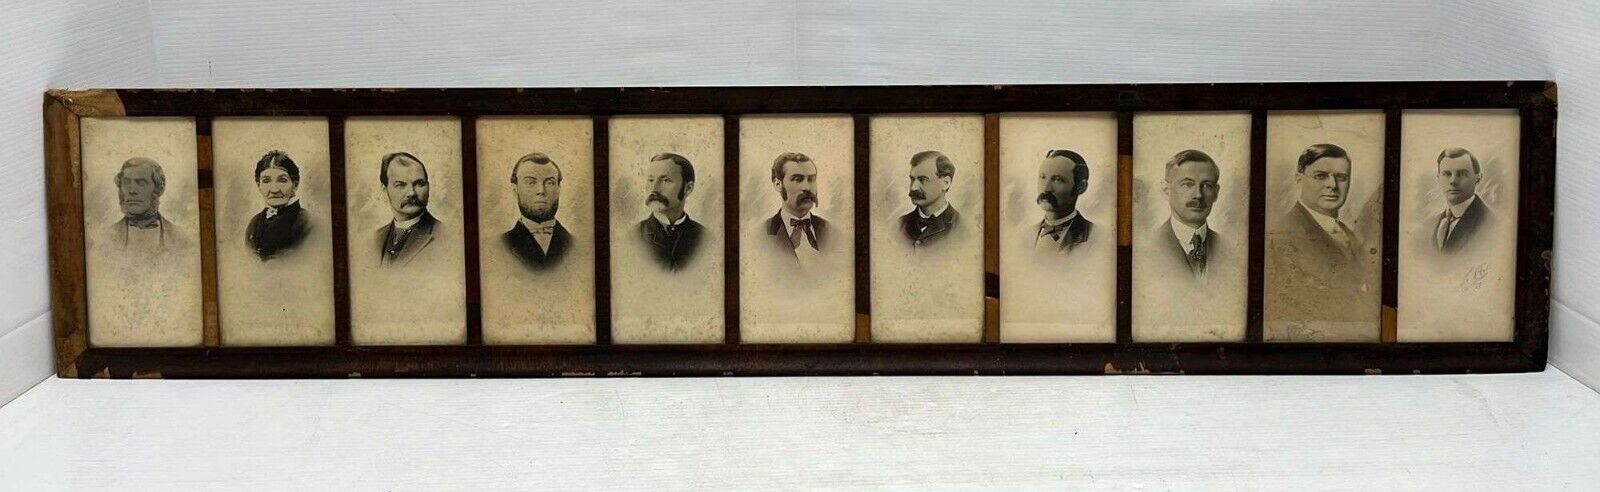 Antique Framed Panoramic Family Photograph Father Mother and 9 Sons, Howell, MI